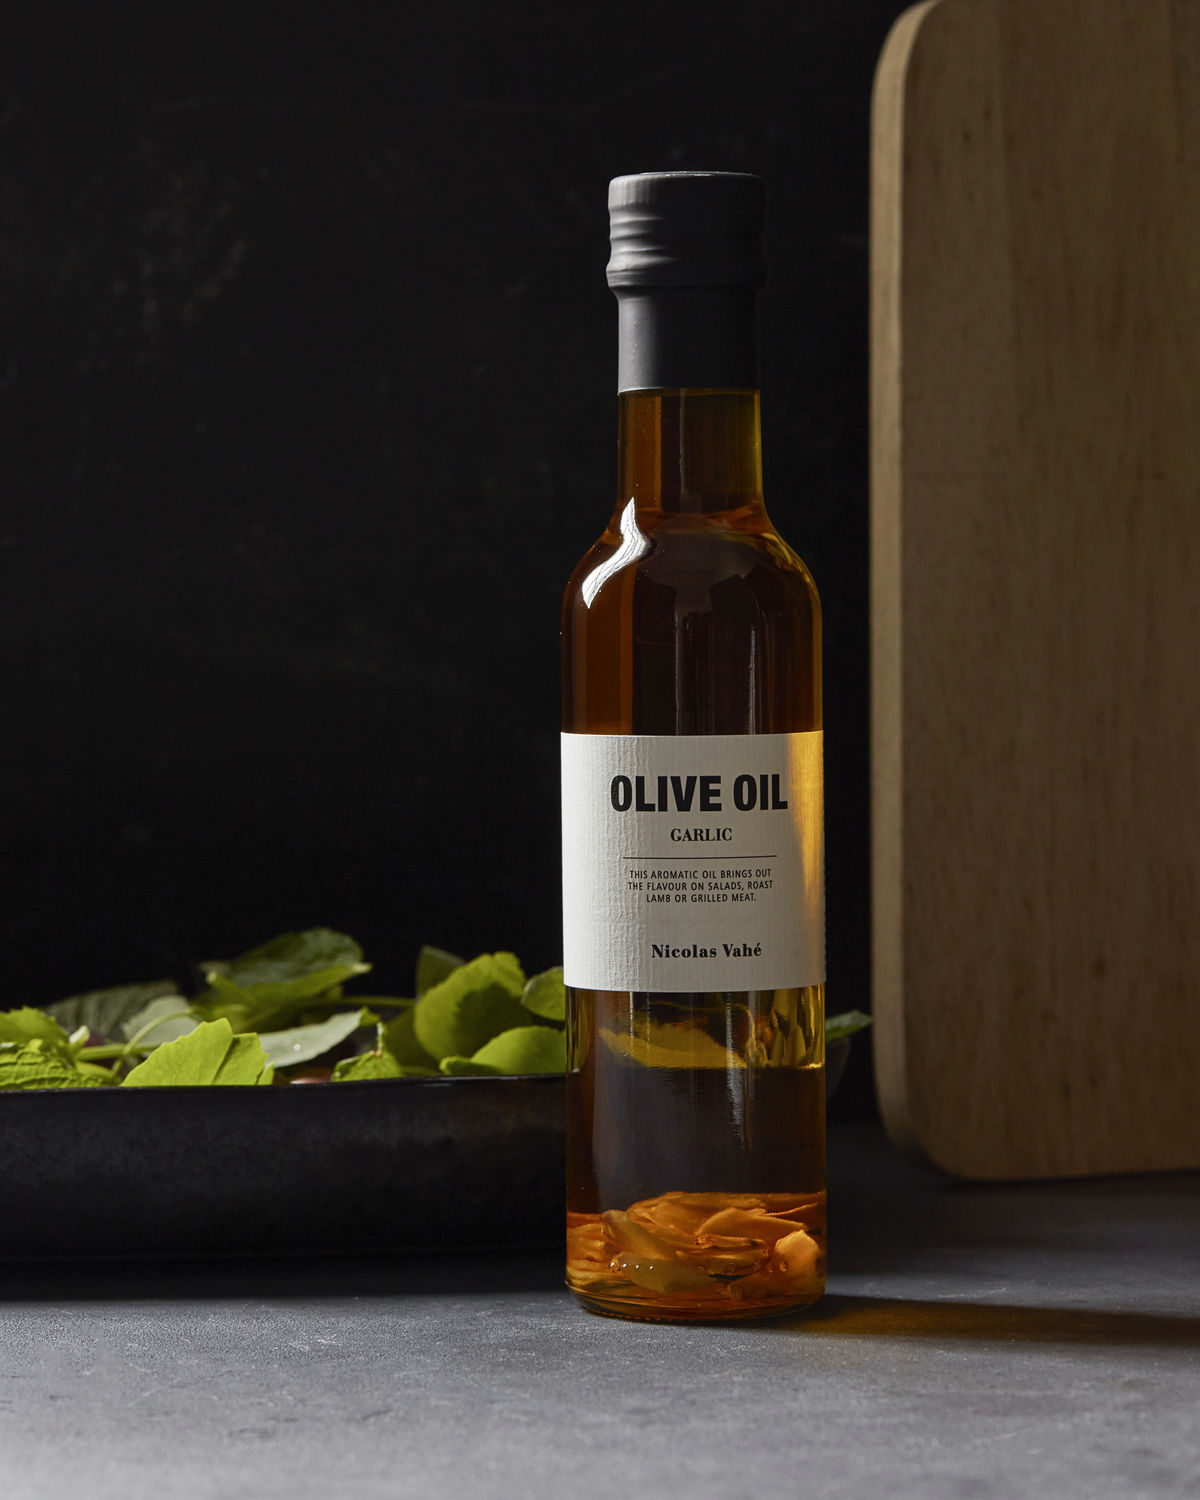 Olive oil with garlic, 25 cl.